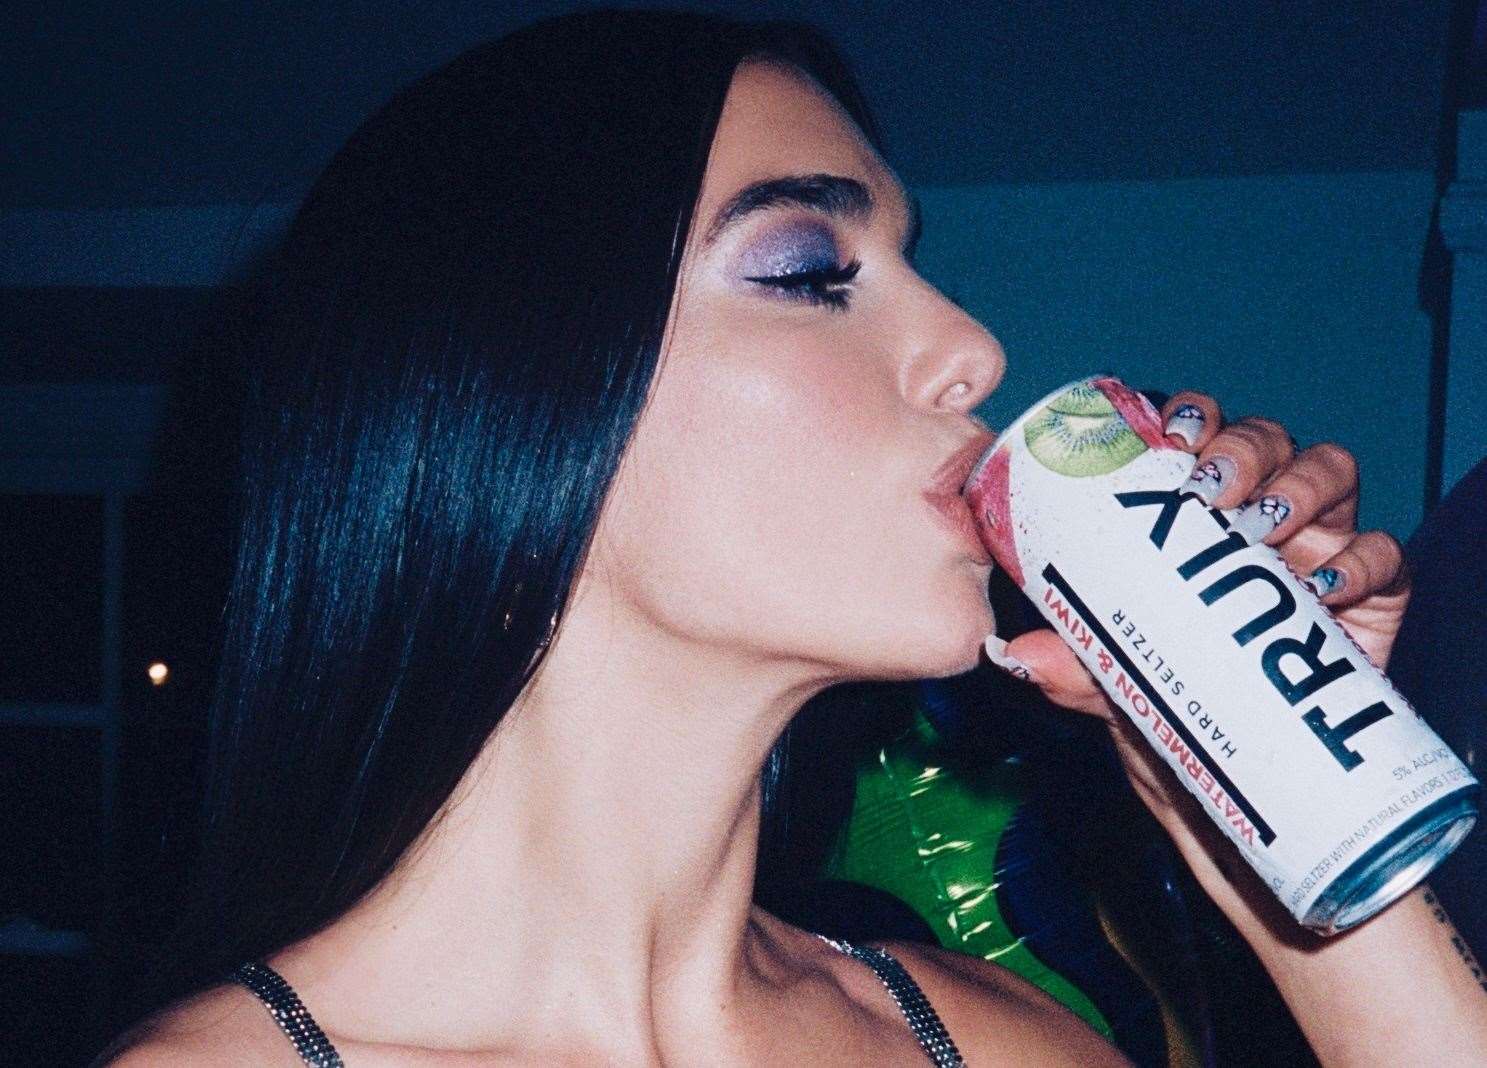 Look - even songstress Dua Lipa is getting in on the craze (and being paid handsomely to do so, no doubt)